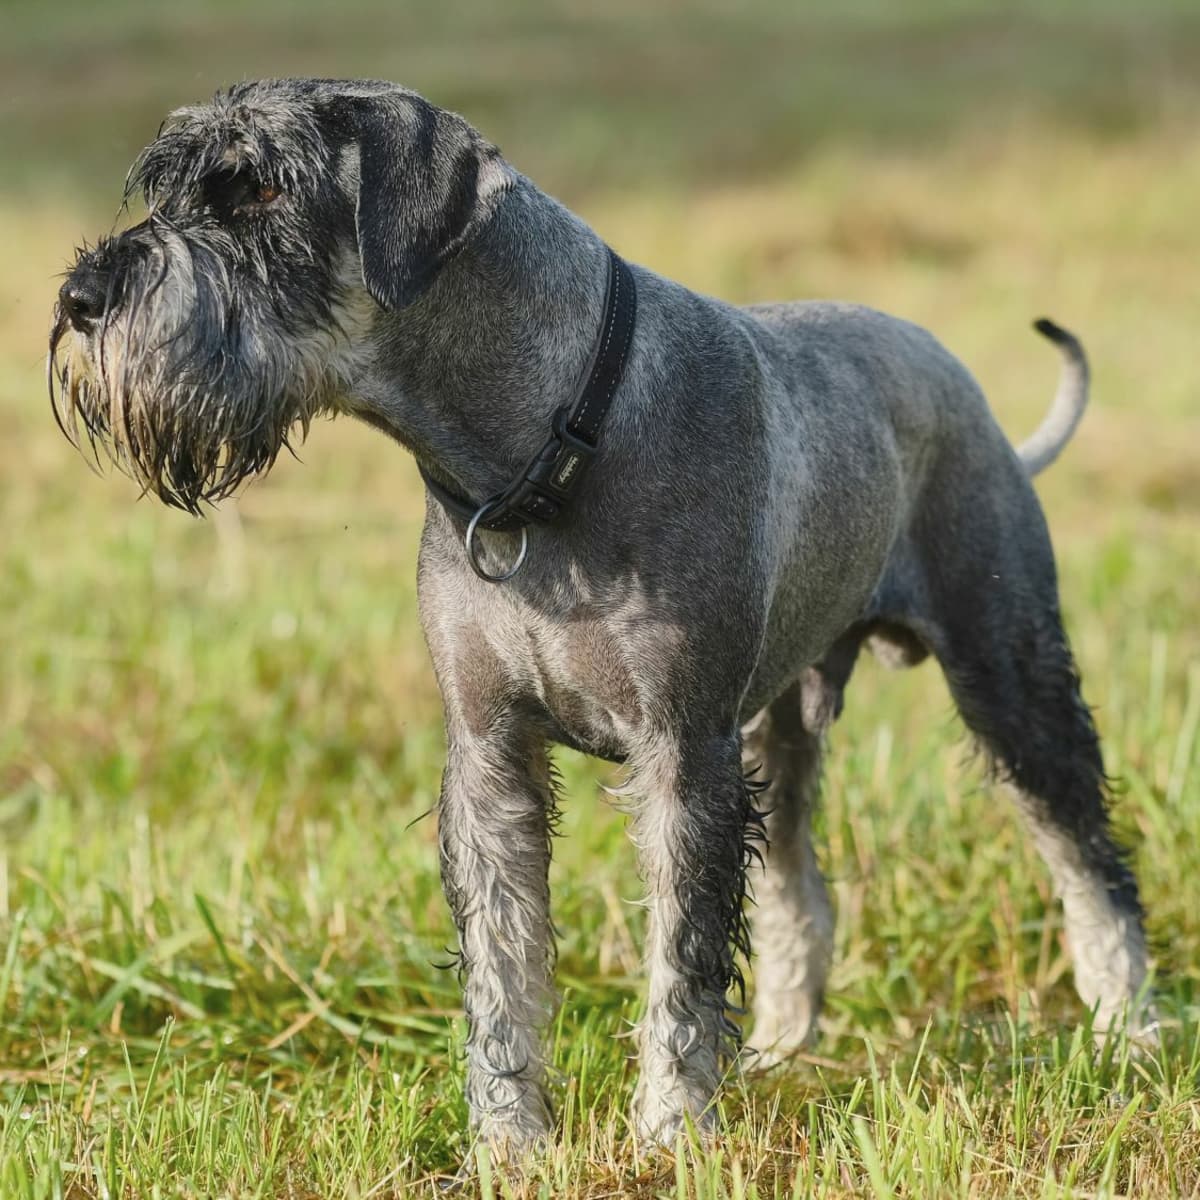 Standard Schnauzer Dogs are well known medium size dogs